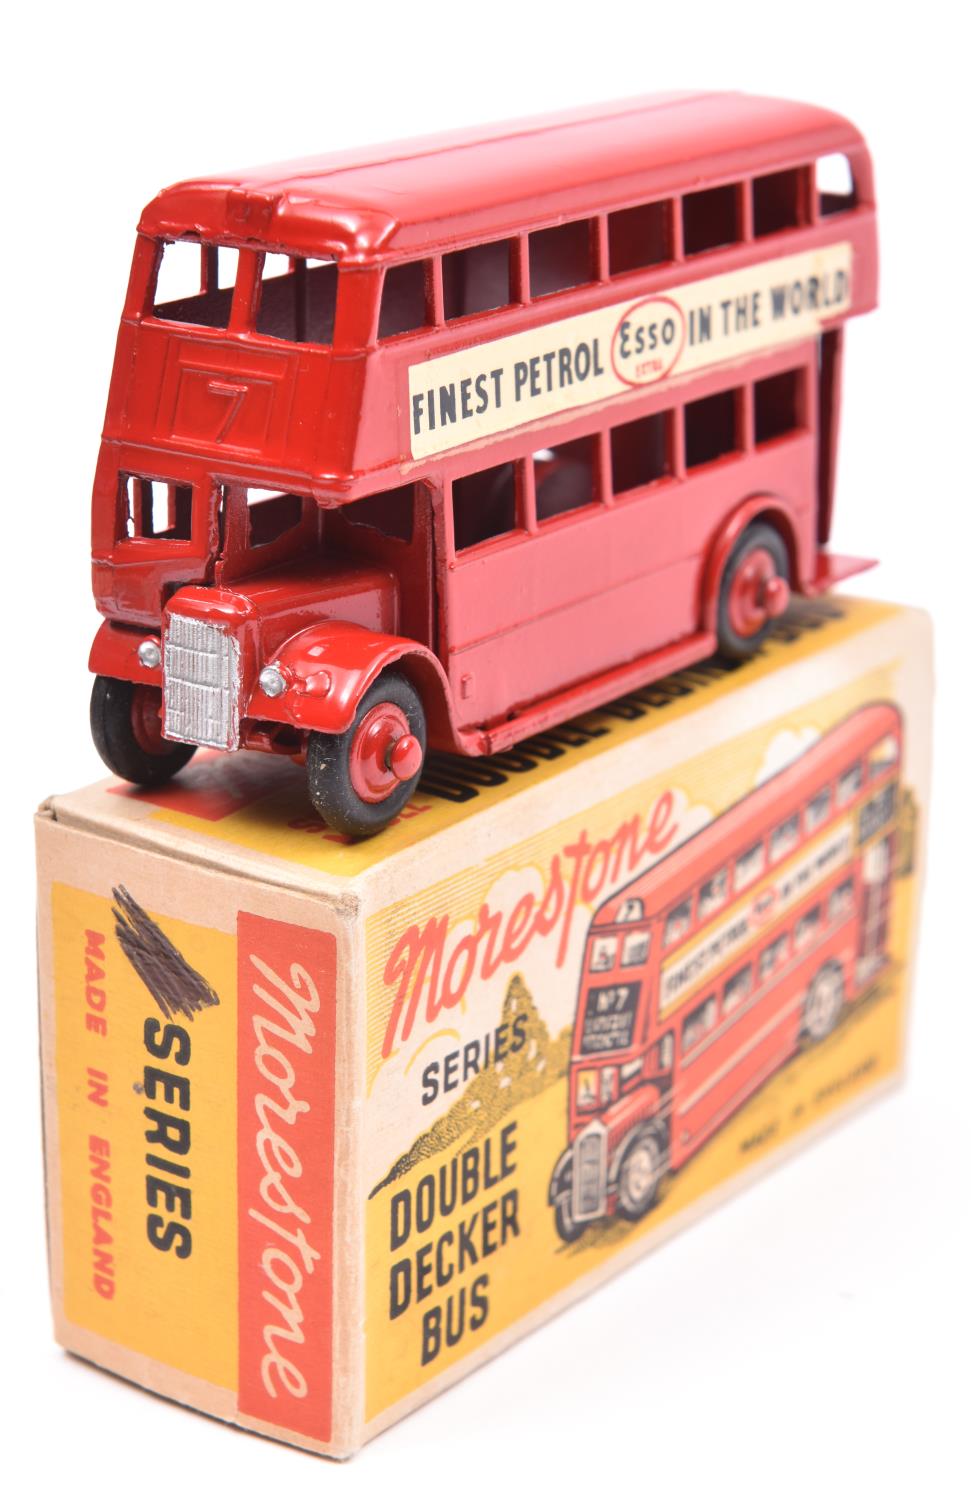 Morestone Series Double Decker Bus. An example in bright red with red wheels and black rubber tyres,